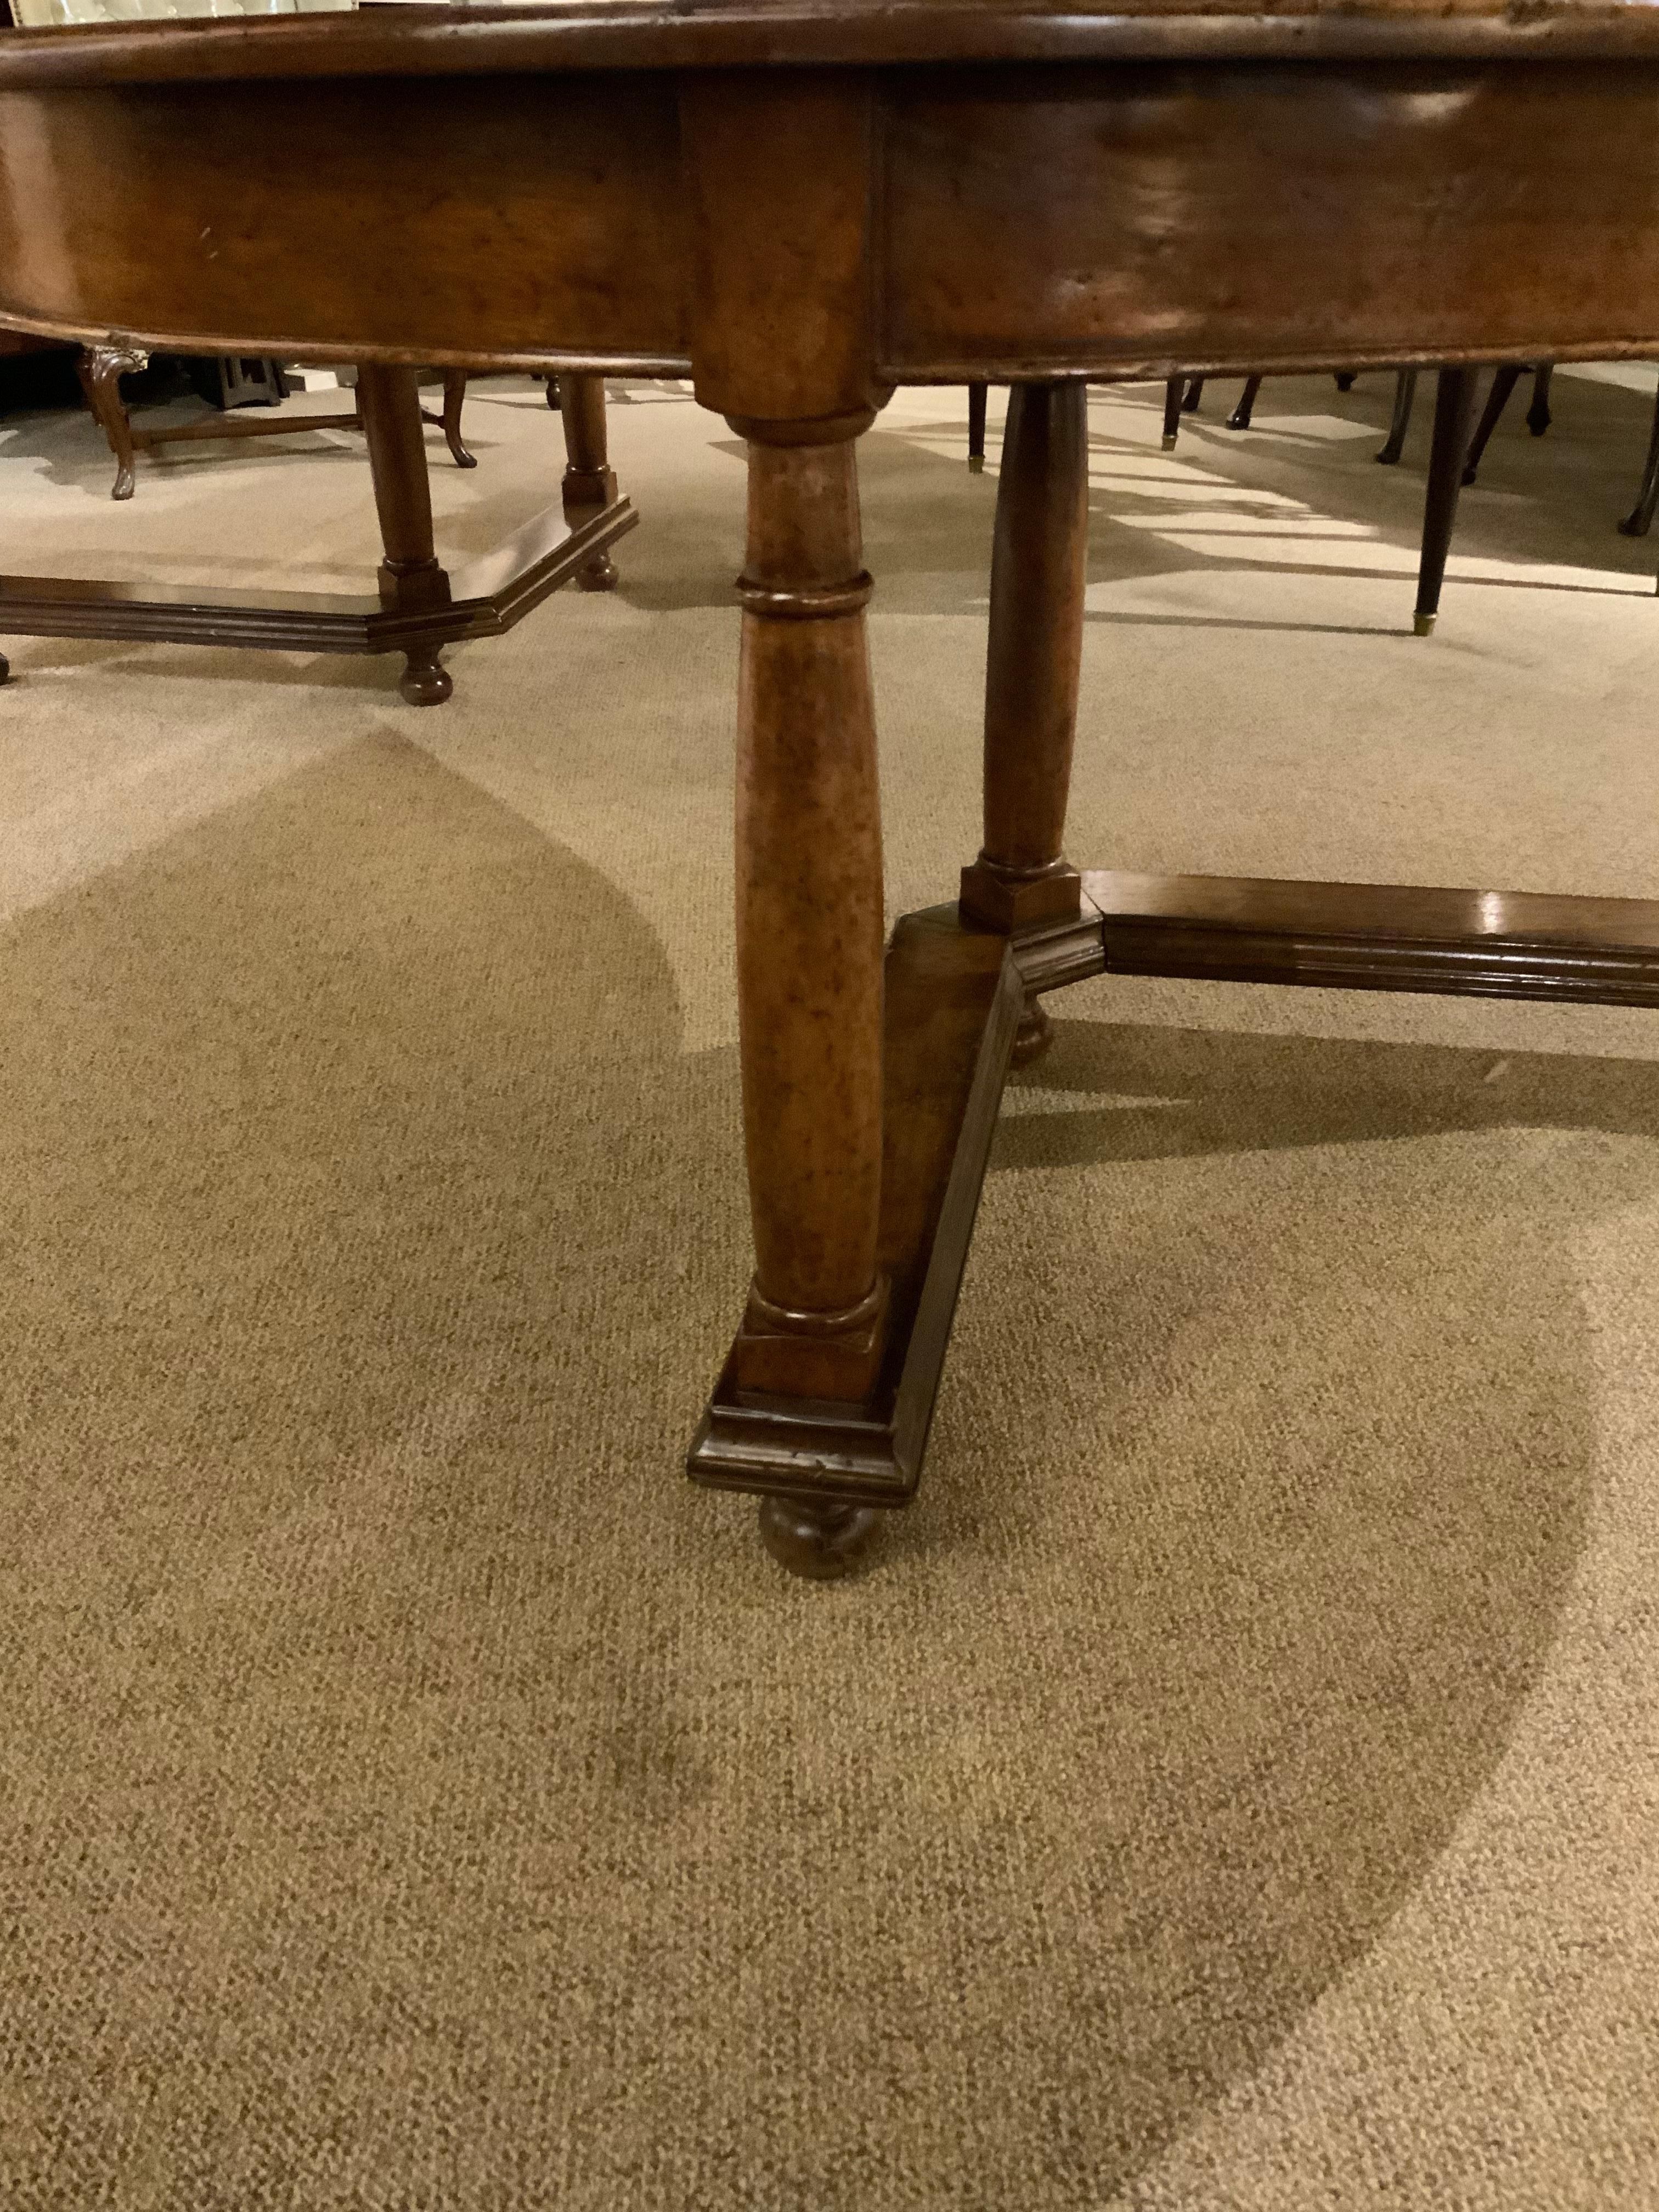 Beautifully constructed and sturdy table raised on shaped legs ending in bun feet.
Two inlays on the top in the form of stars grace the top of this table. It has two leaves
That are removable. The finish is a distressed walnut that makes this